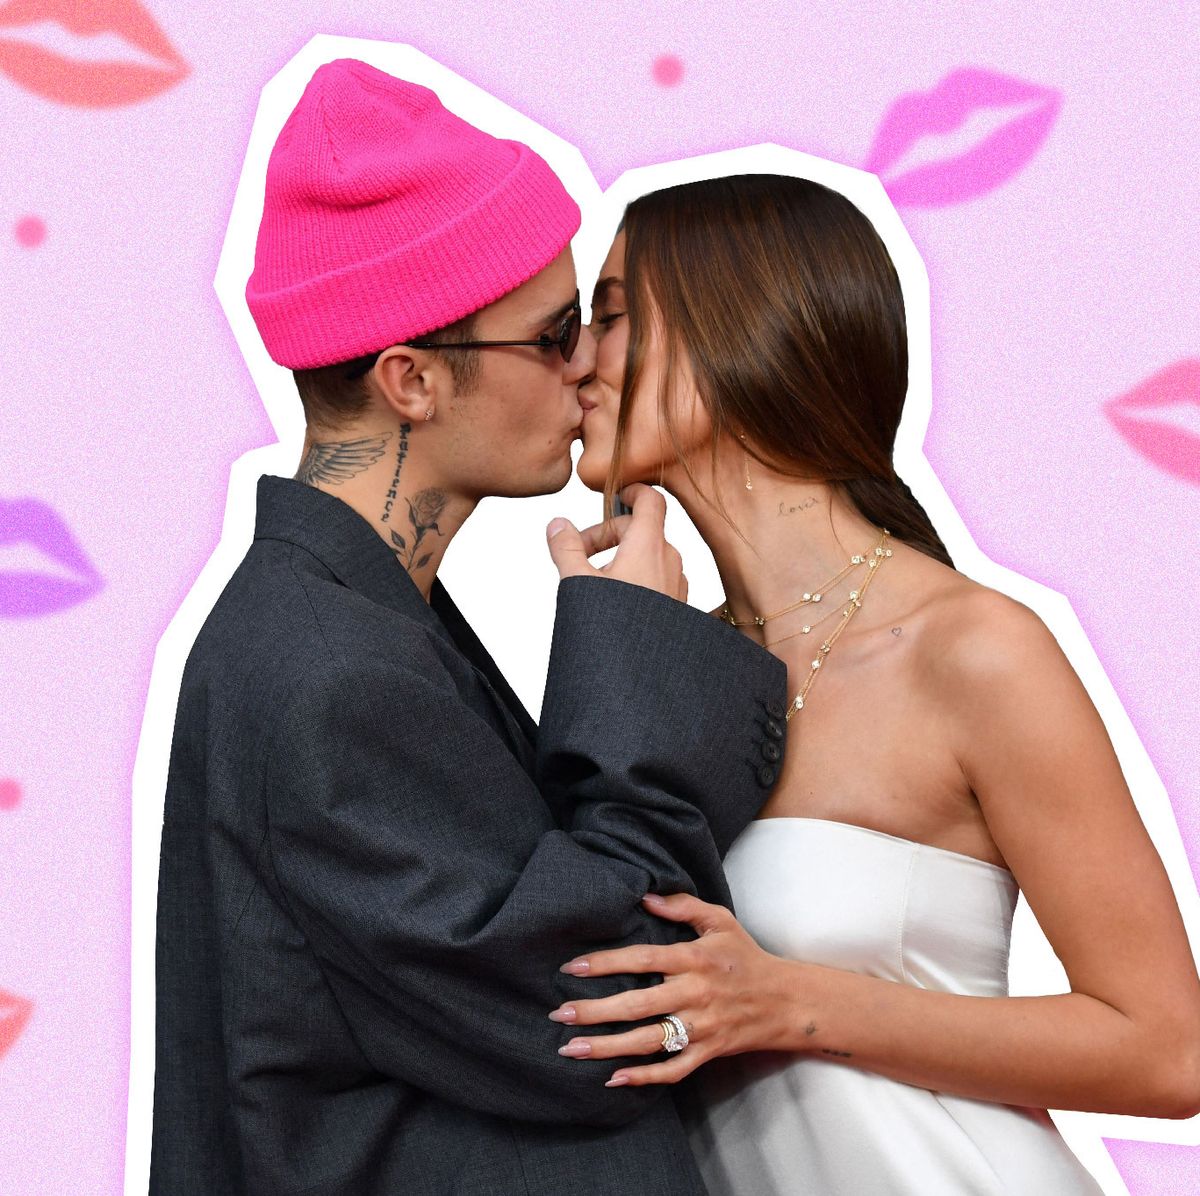 Which Was Better: Your First Kiss or Your First Time?